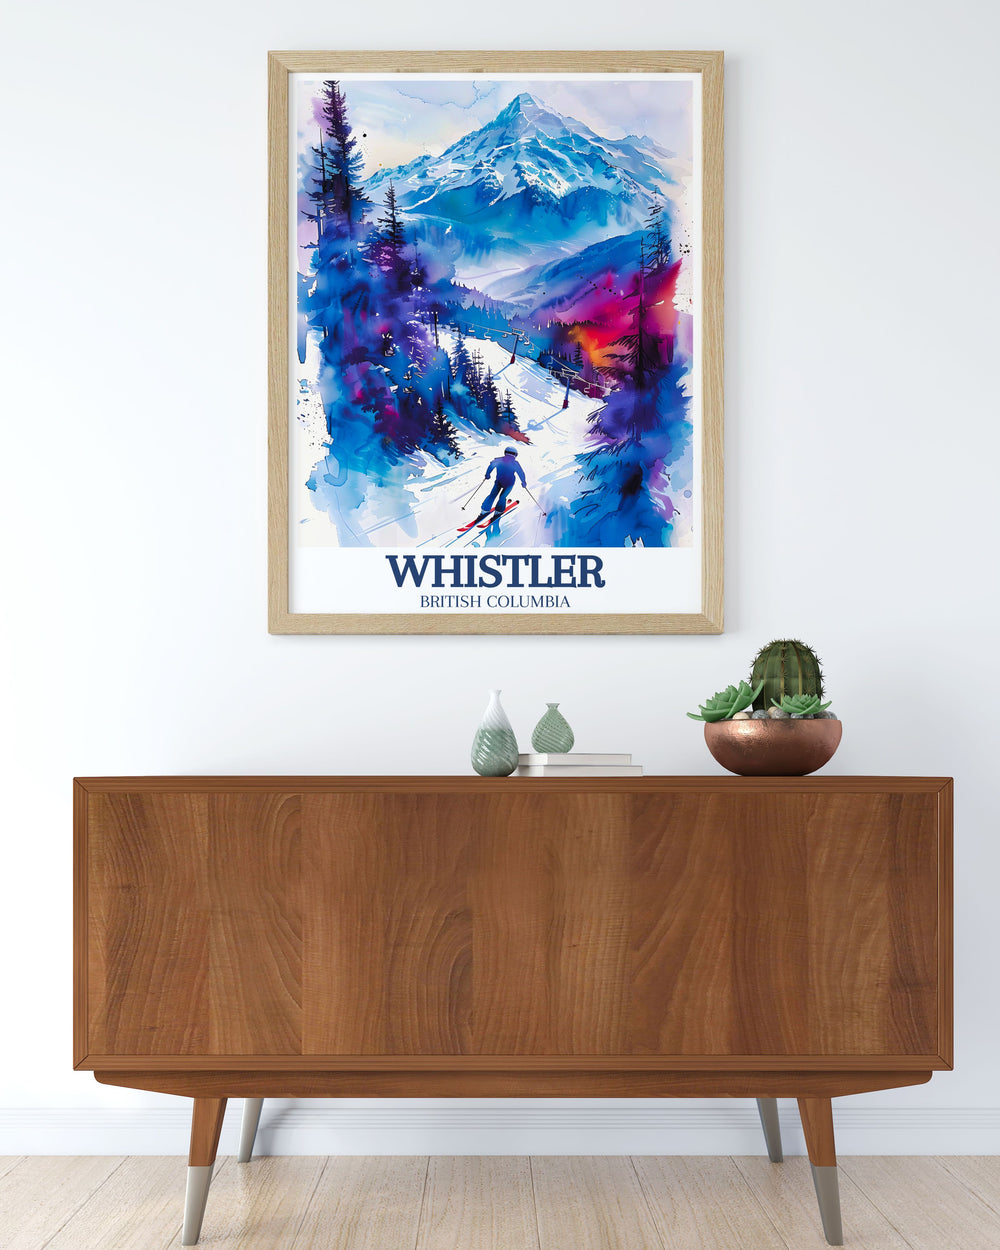 Whistler art print capturing the iconic alpine scenery of the Coast Mountains ideal for ski enthusiasts and nature lovers looking to enhance their home decor